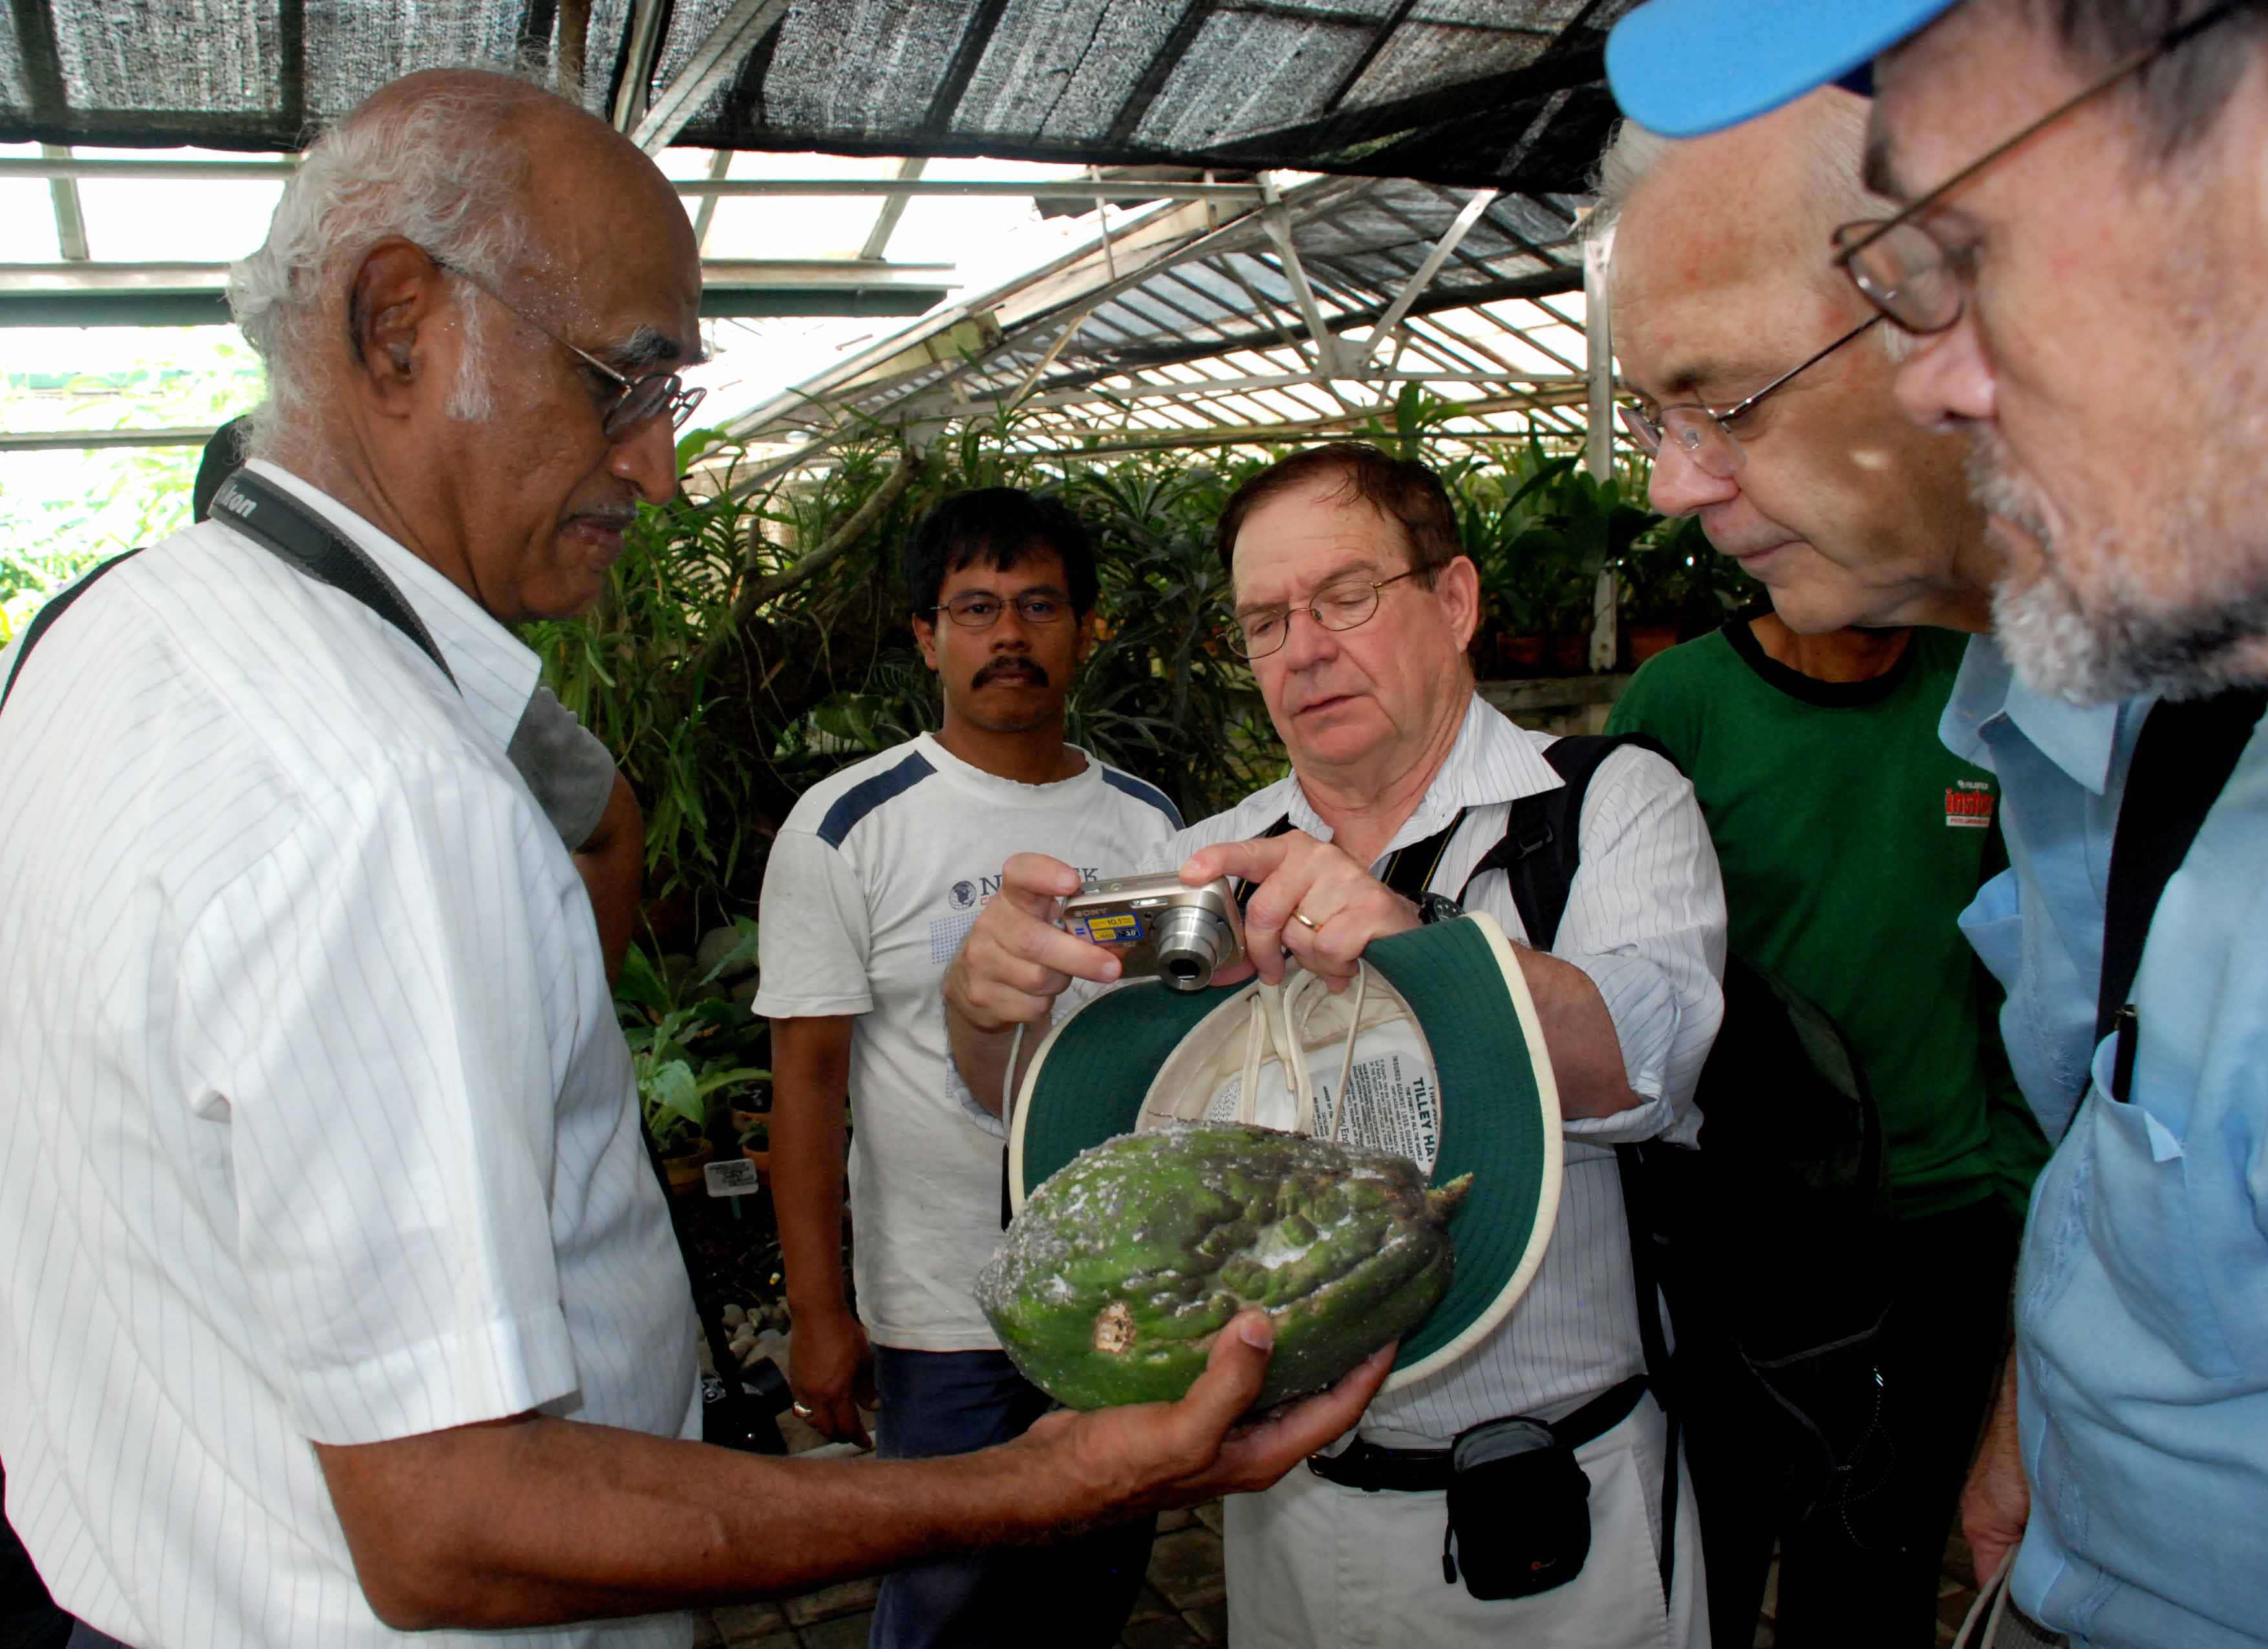 Muni Muniappan (left) holds a papaya infested with the papaya mealybug while other scientists look on.